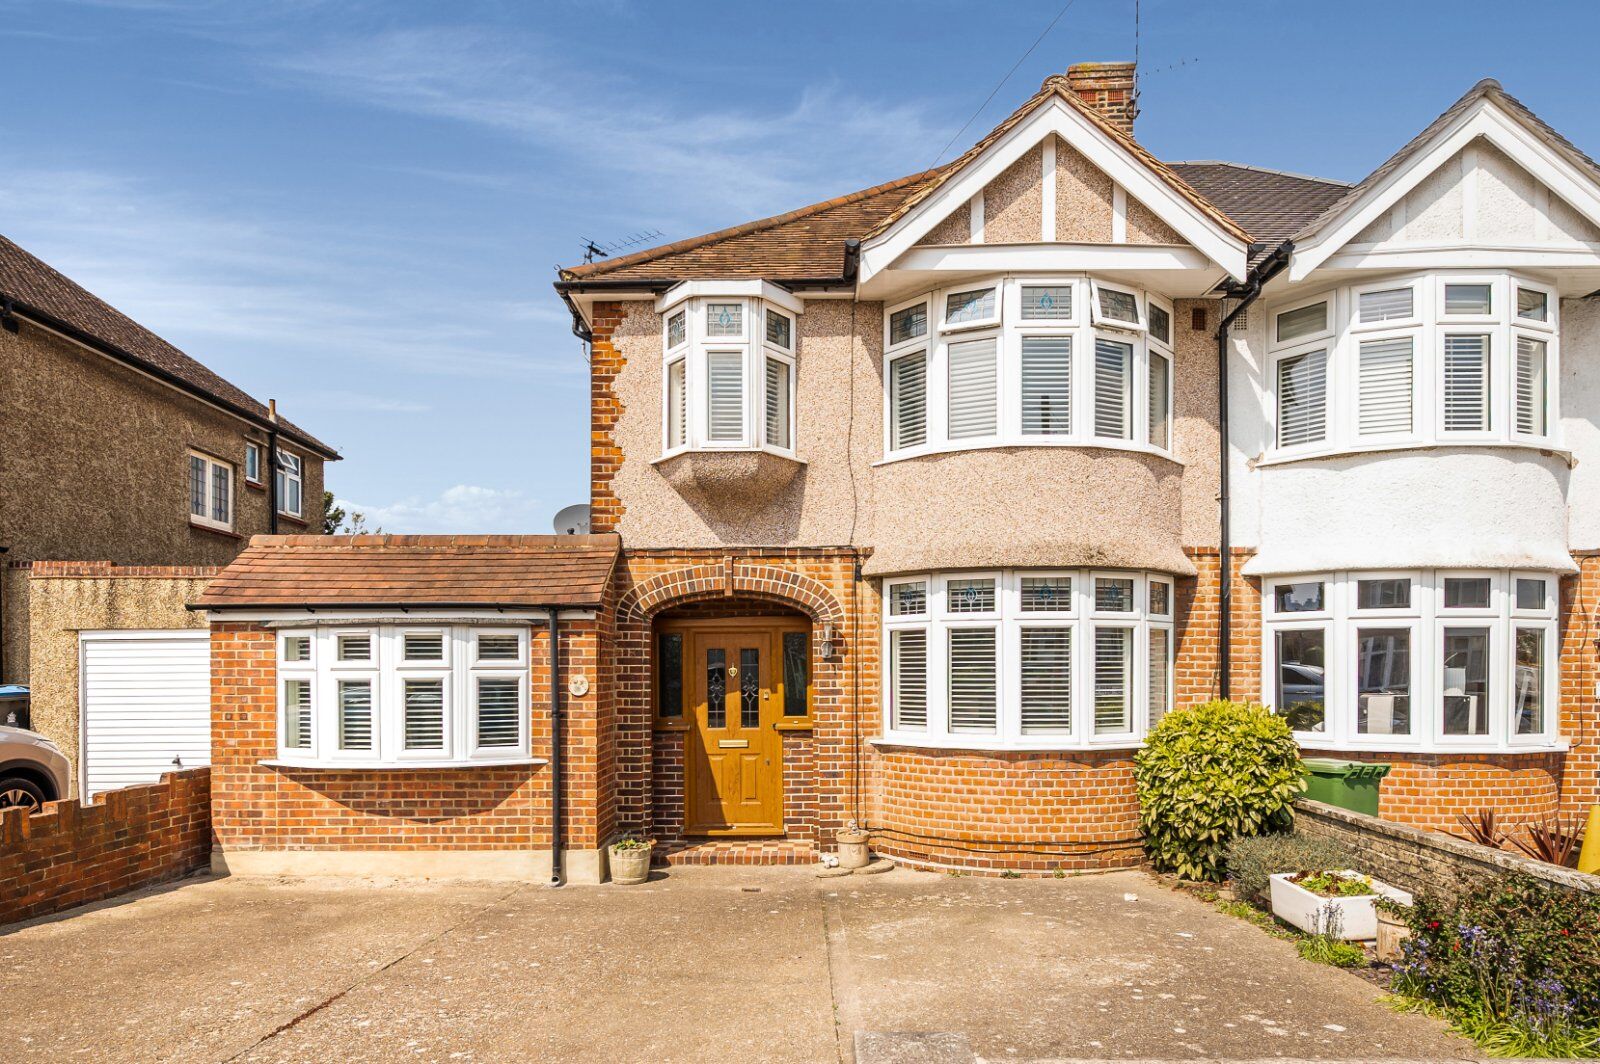 4 bedroom semi detached house for sale Bolton Road, Chessington, KT9, main image